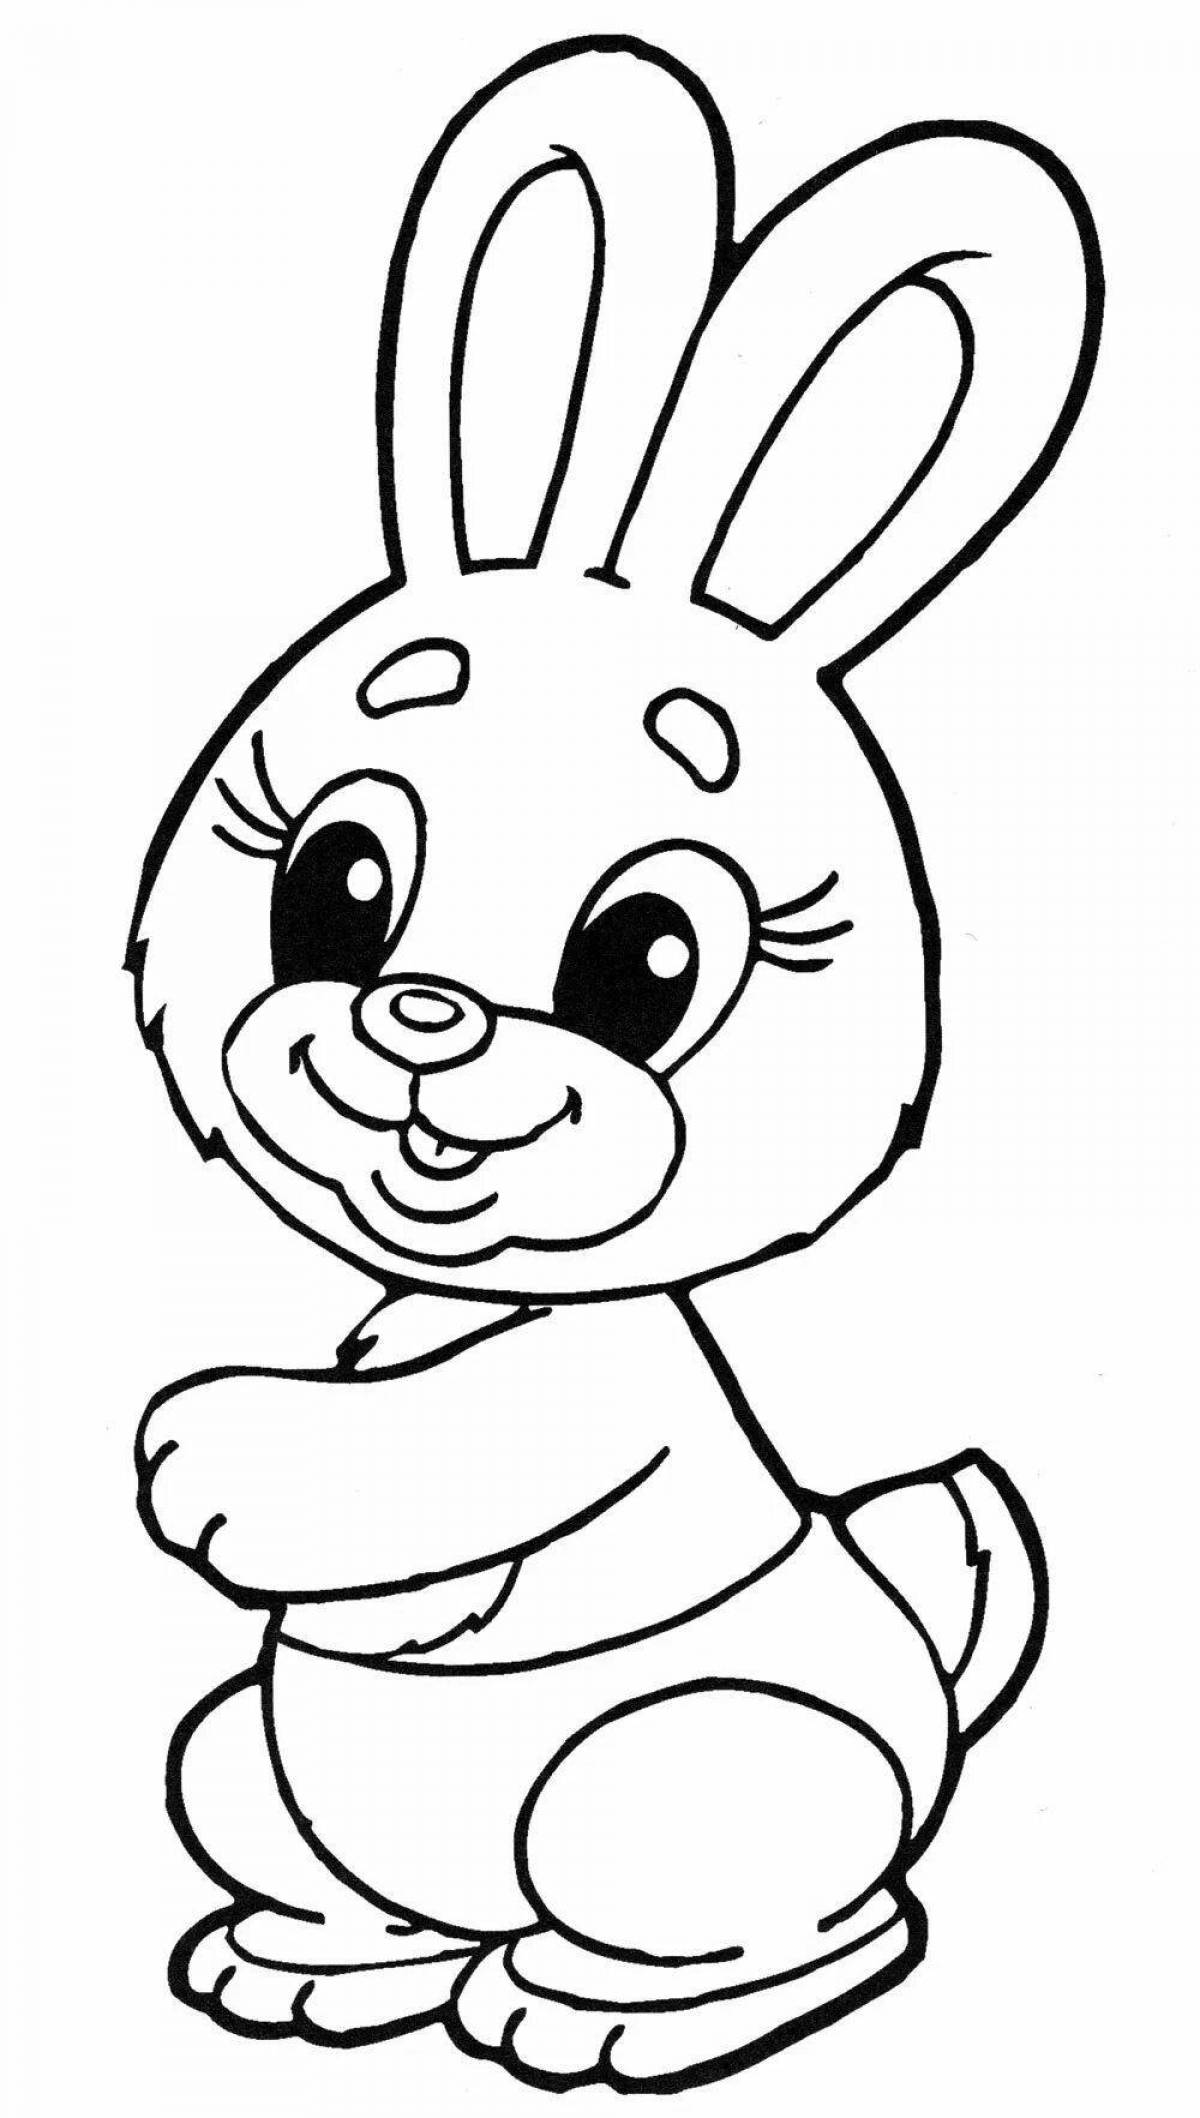 Cute rabbit coloring book for 2 year olds